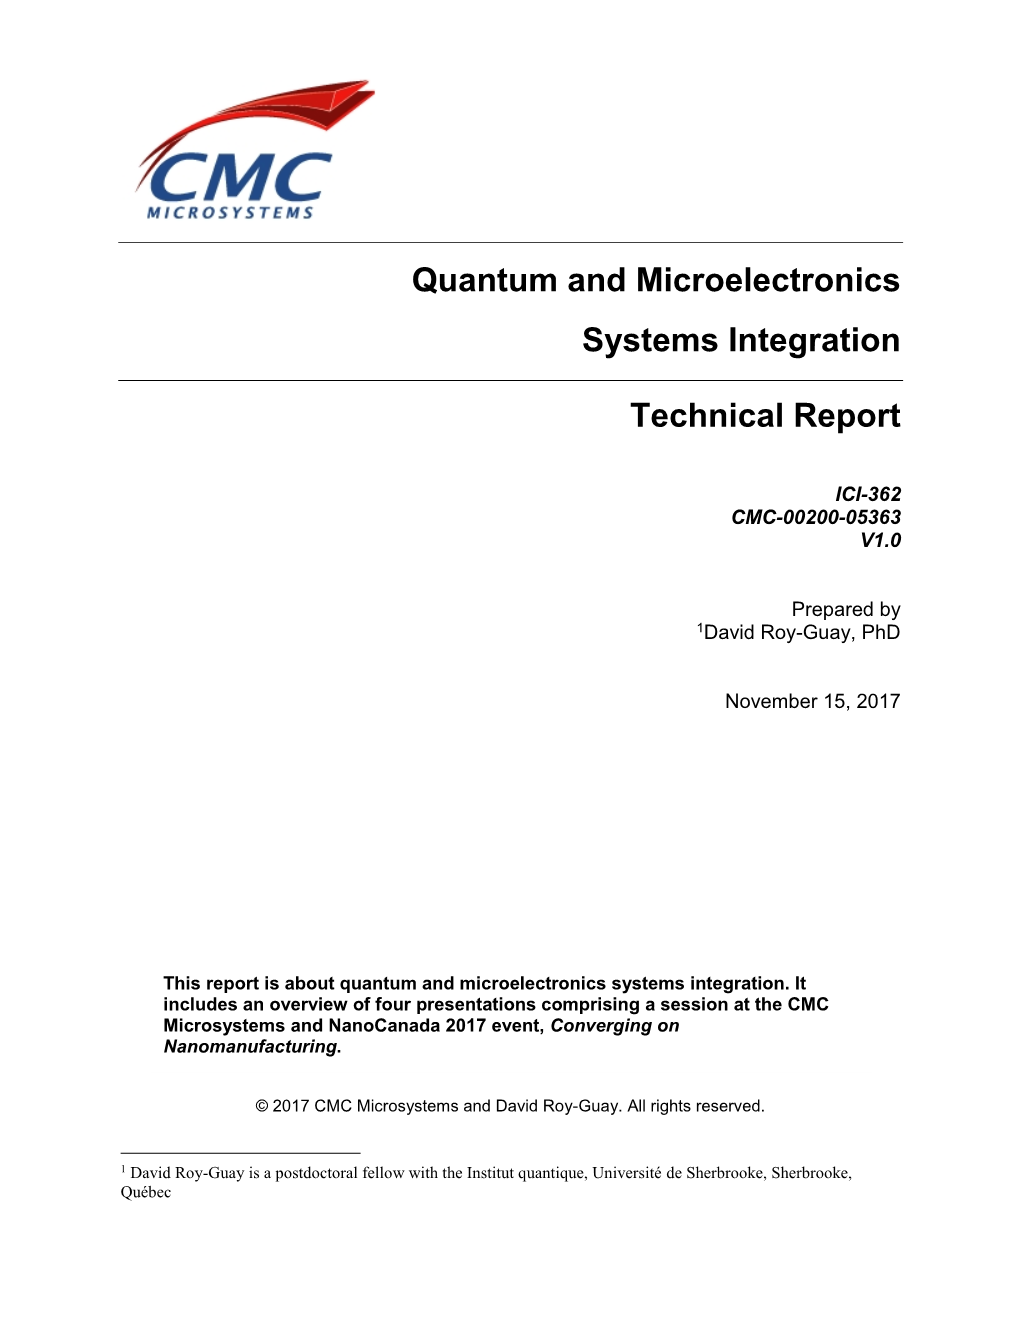 Technical Report: Quantum and Microelectronics Systems Integration, V1.0 Page 2 of 32 CMC Microsystems ICI-362 CMC-00200-05363